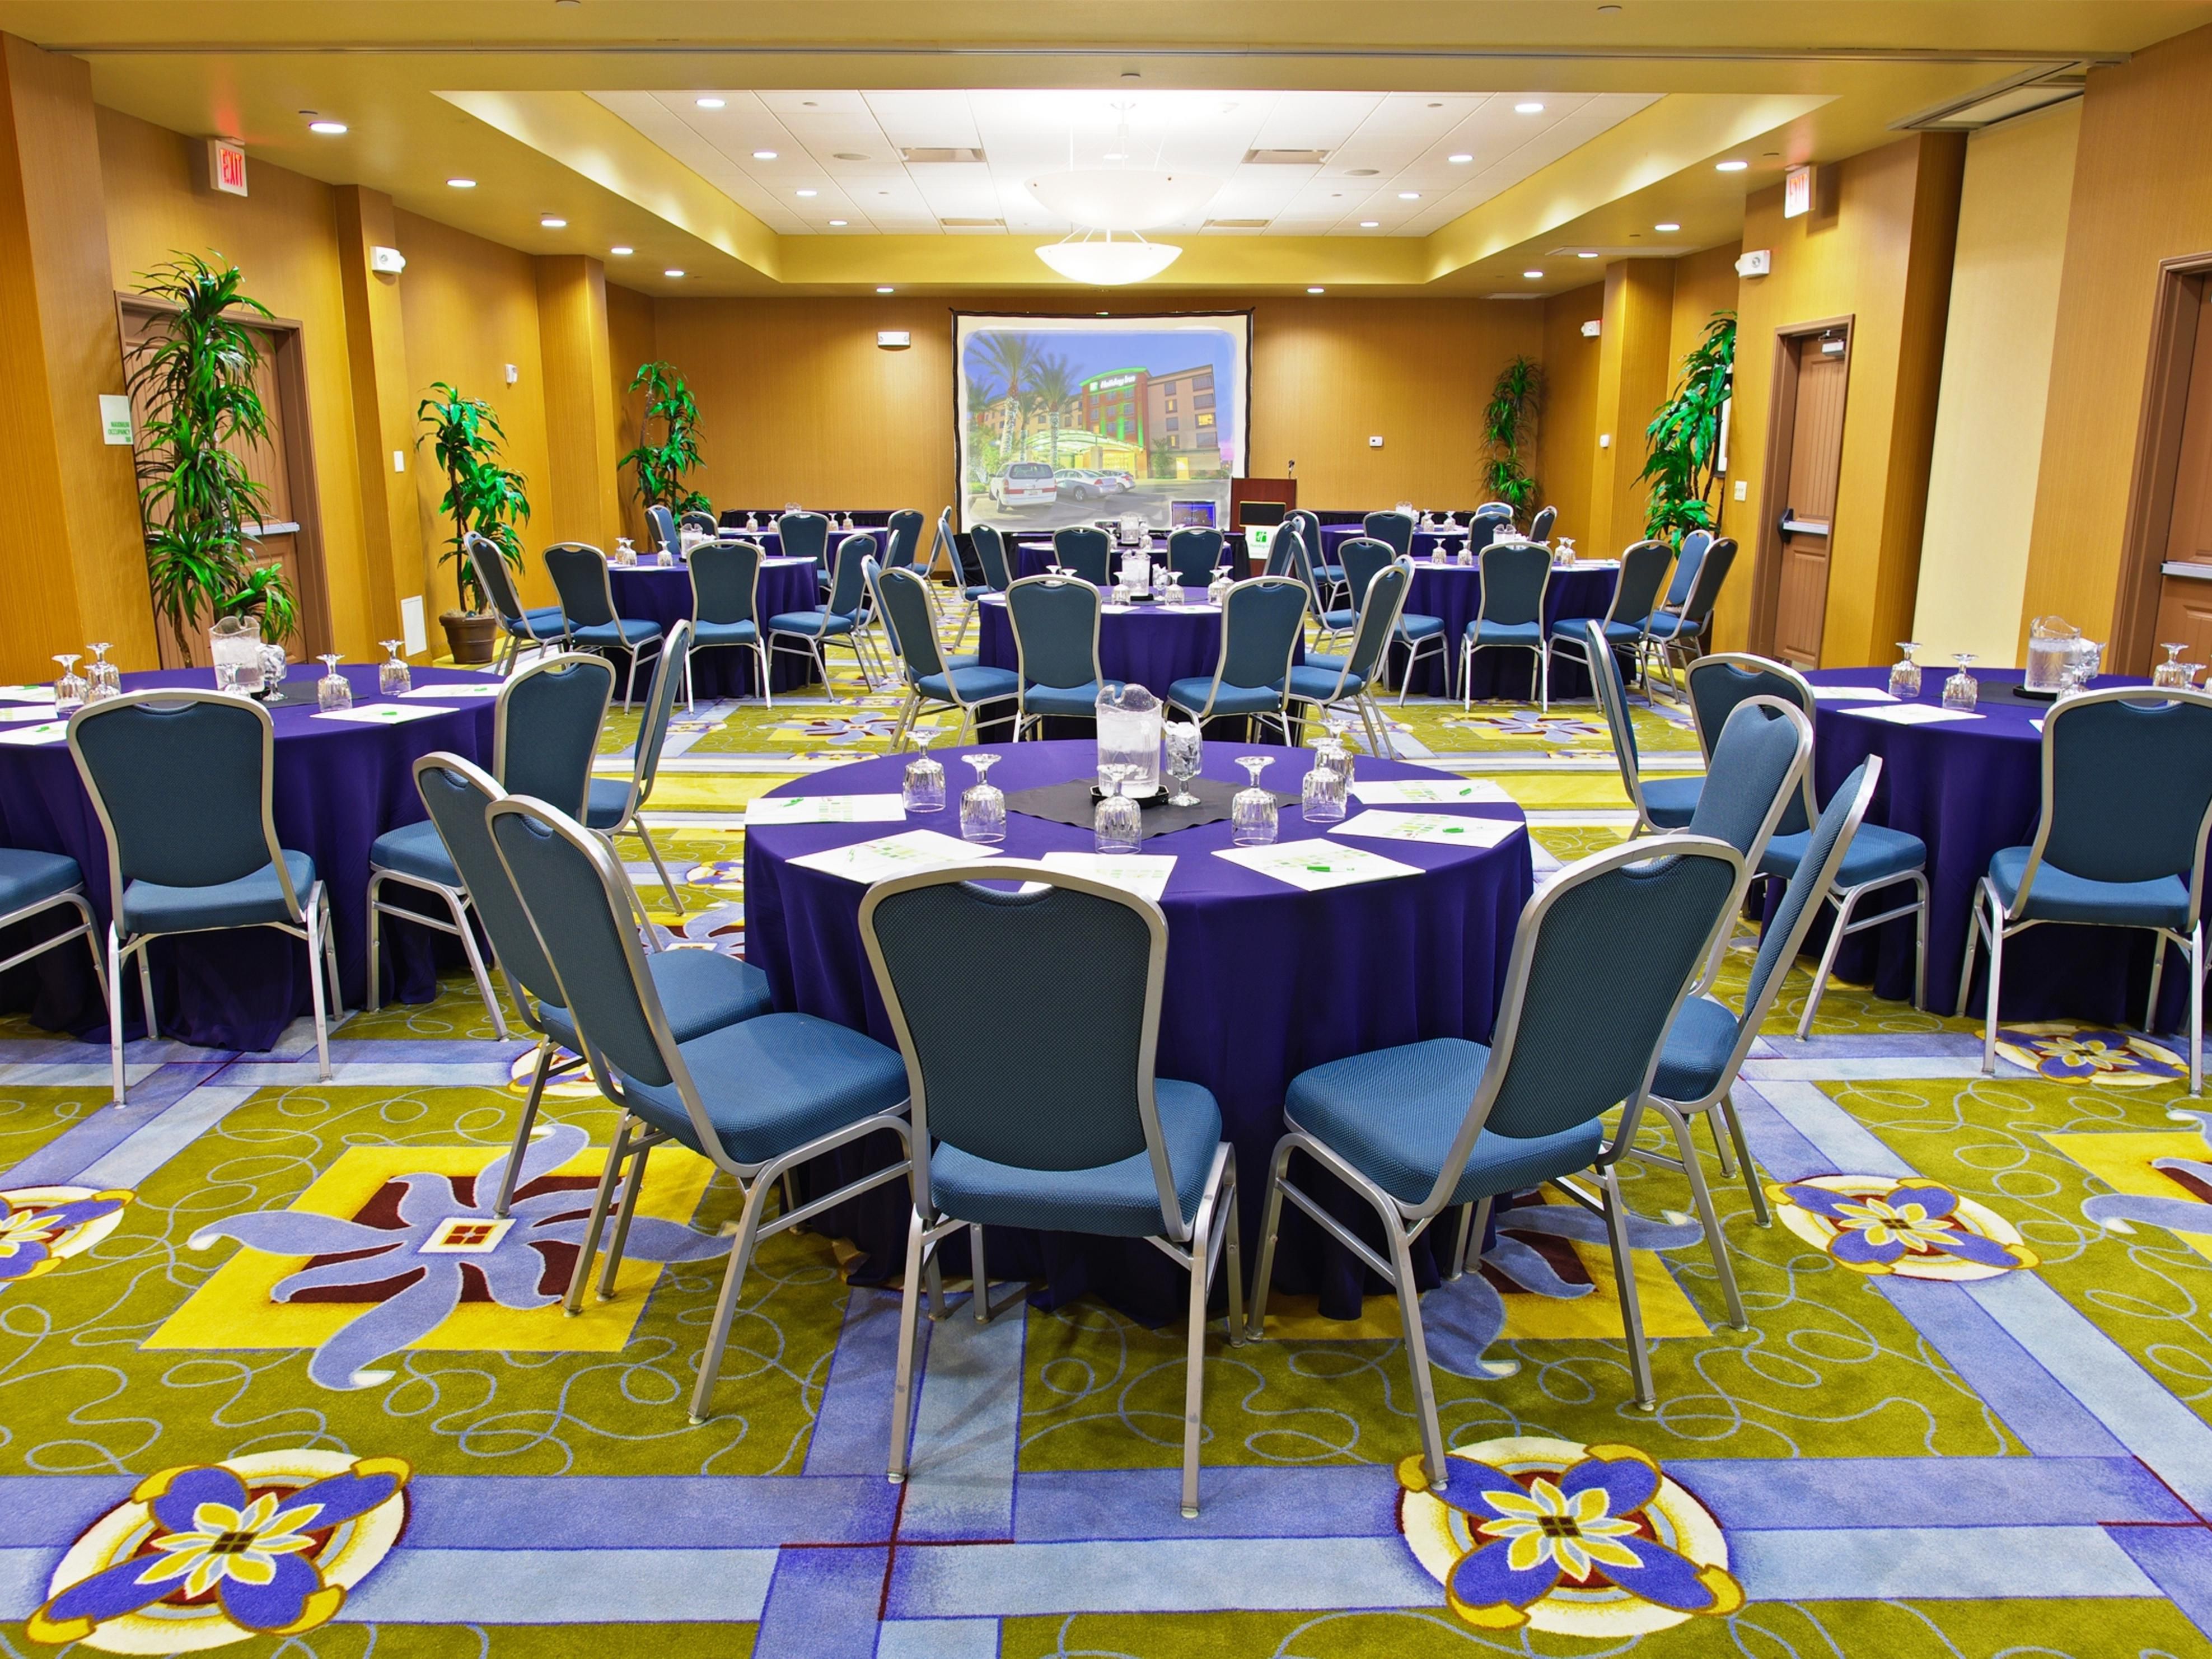 Our hotel offers a 2,000 sq. ft. ballroom for small to mid-size business and social gatherings besides  a pre-function area, a board room and a 600 sq. ft. meeting room. Our hotel offers catering services for 20- 150 guests.